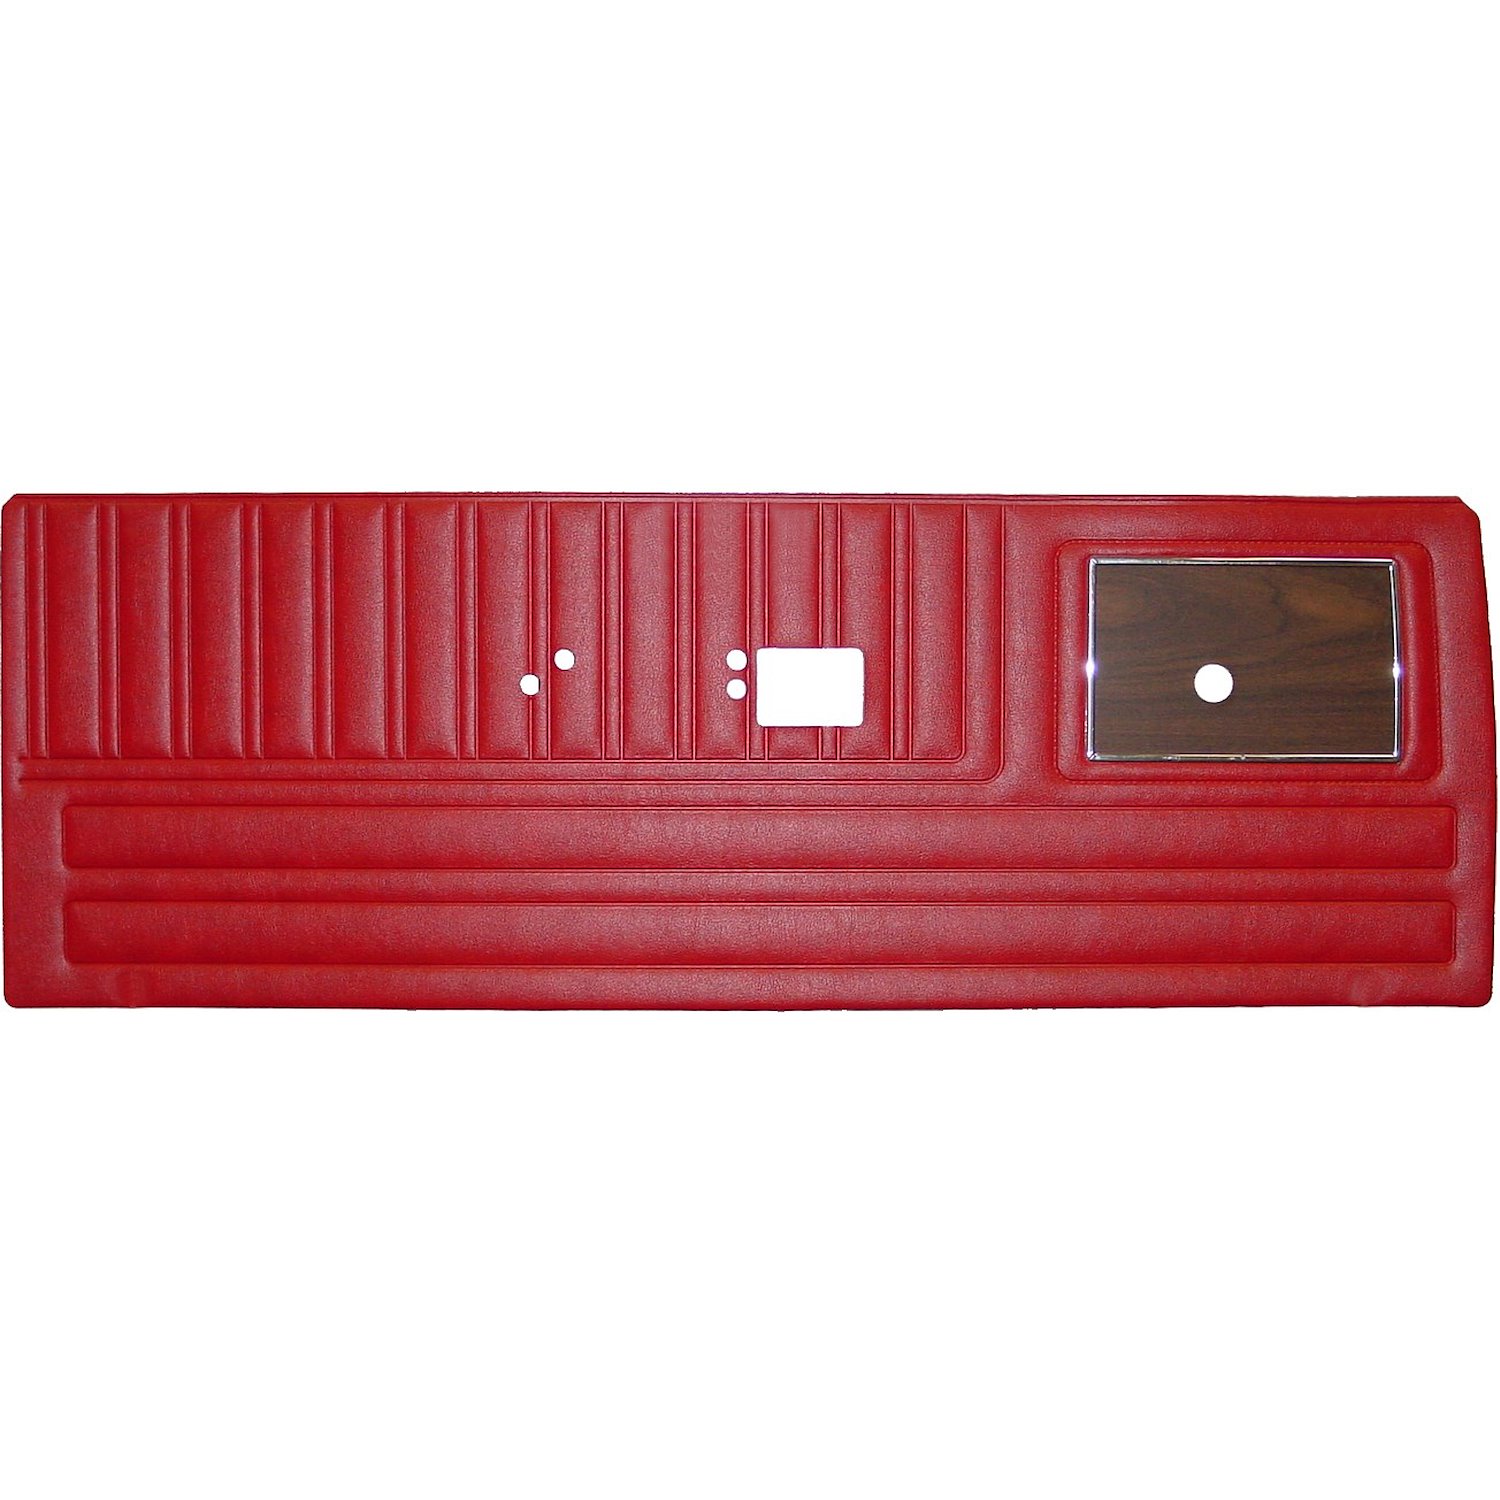 DO70CLDW012550 70 DUSTER BKT/BENCH W/CHROME FRONT PANELS - RED